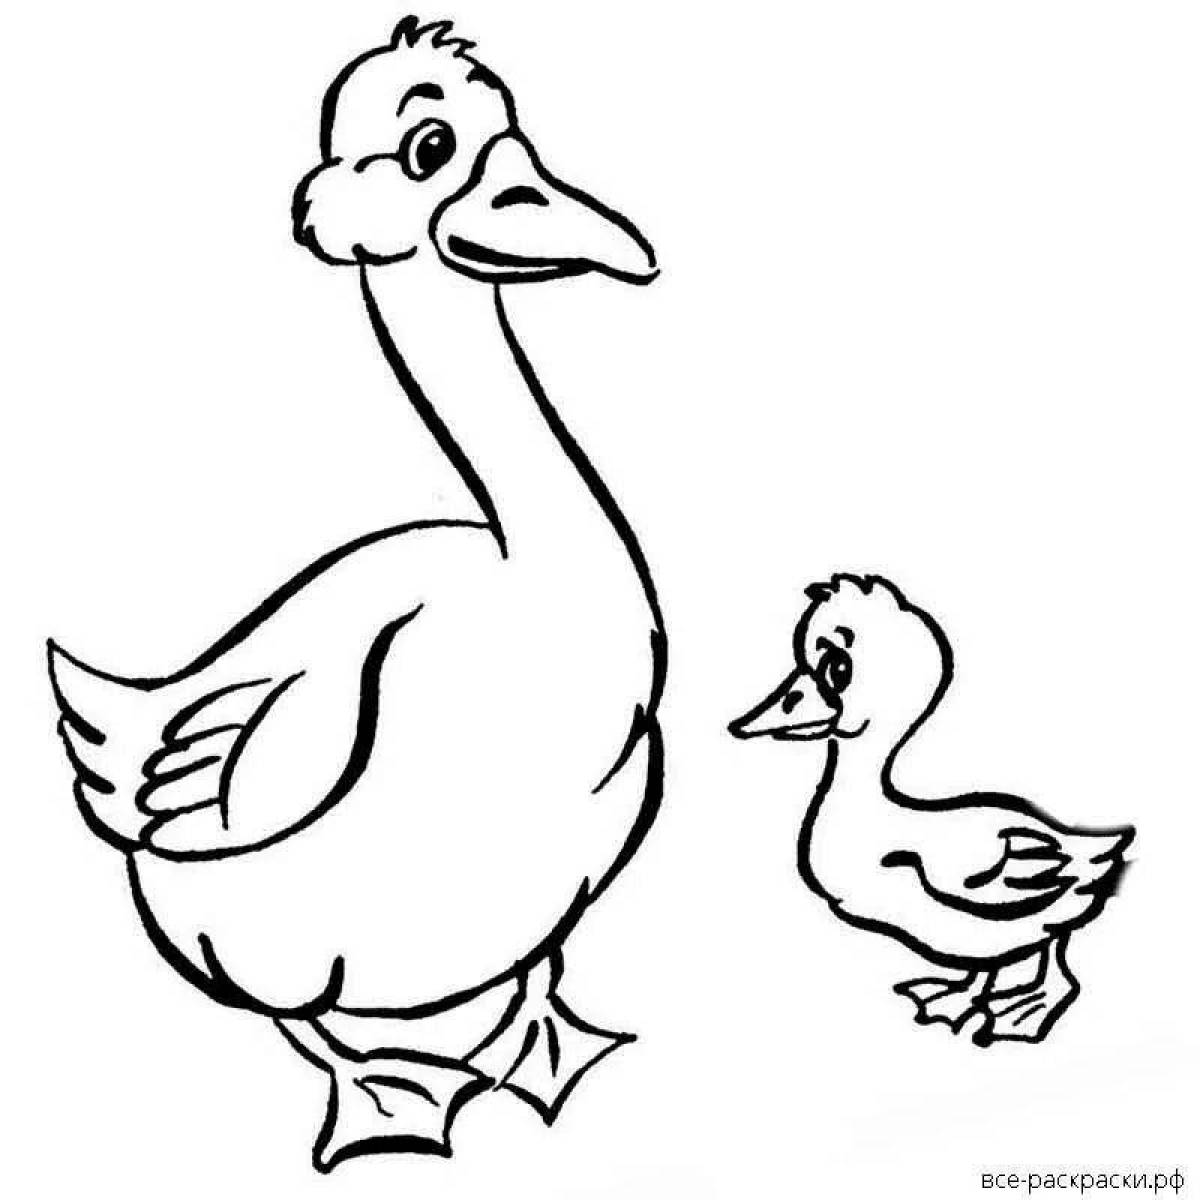 Colorful gosling coloring page